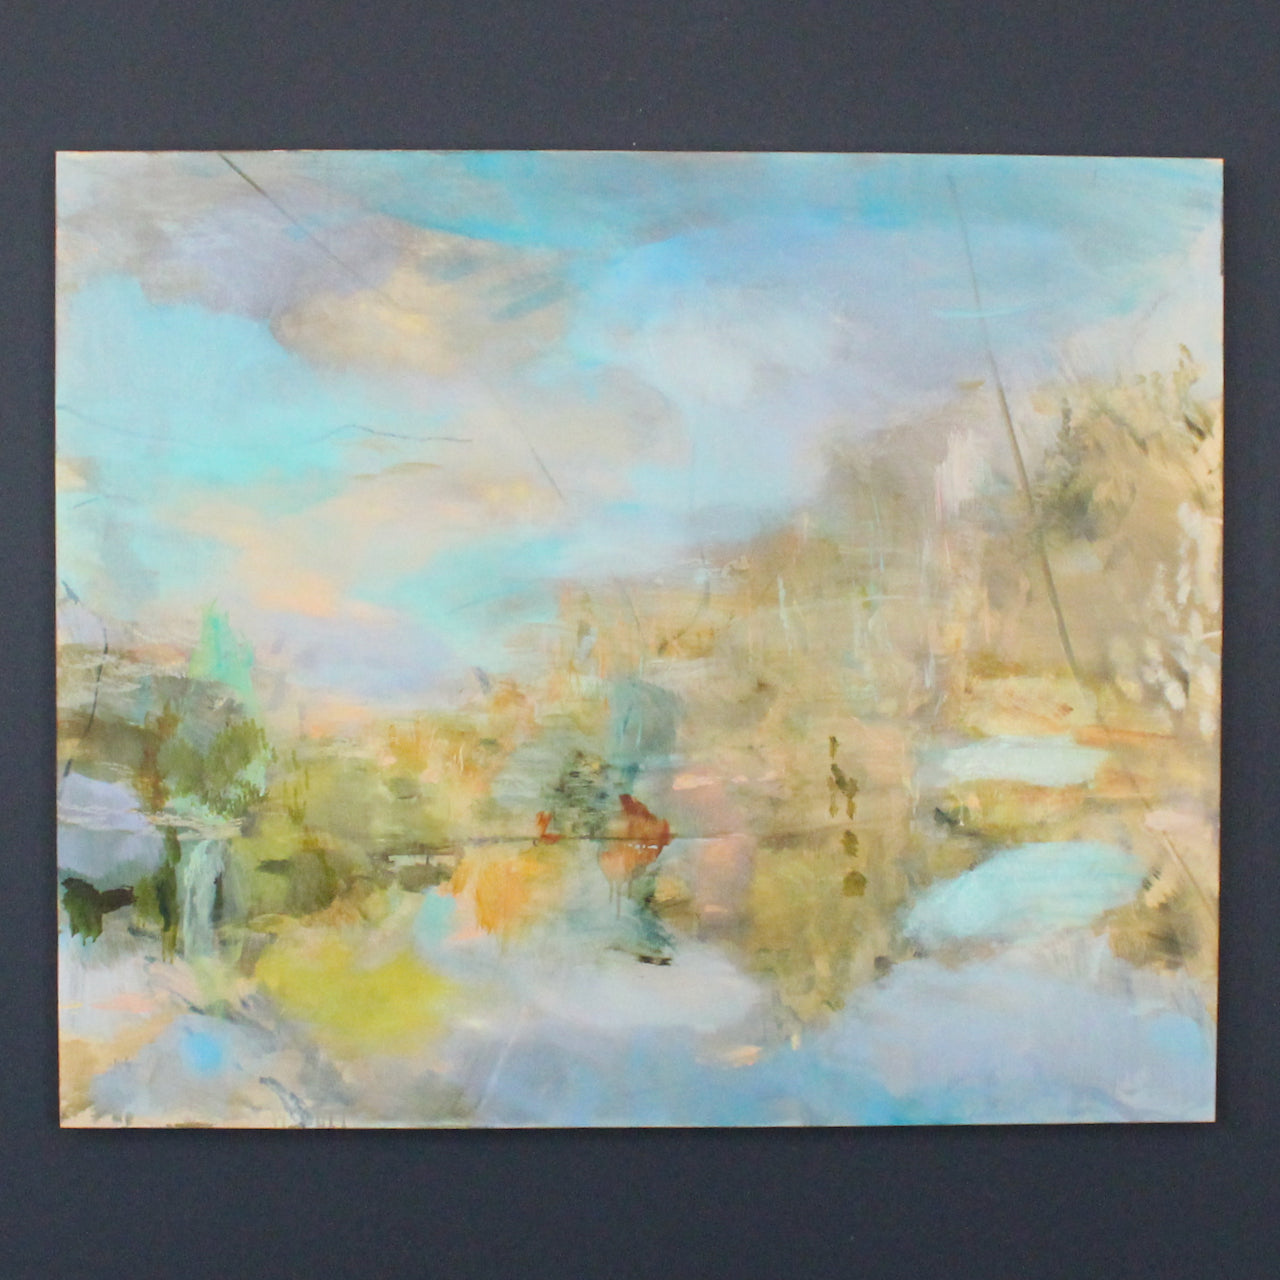 A Katy Brown abstract painting of a pond surrounded by flowering shrubs.